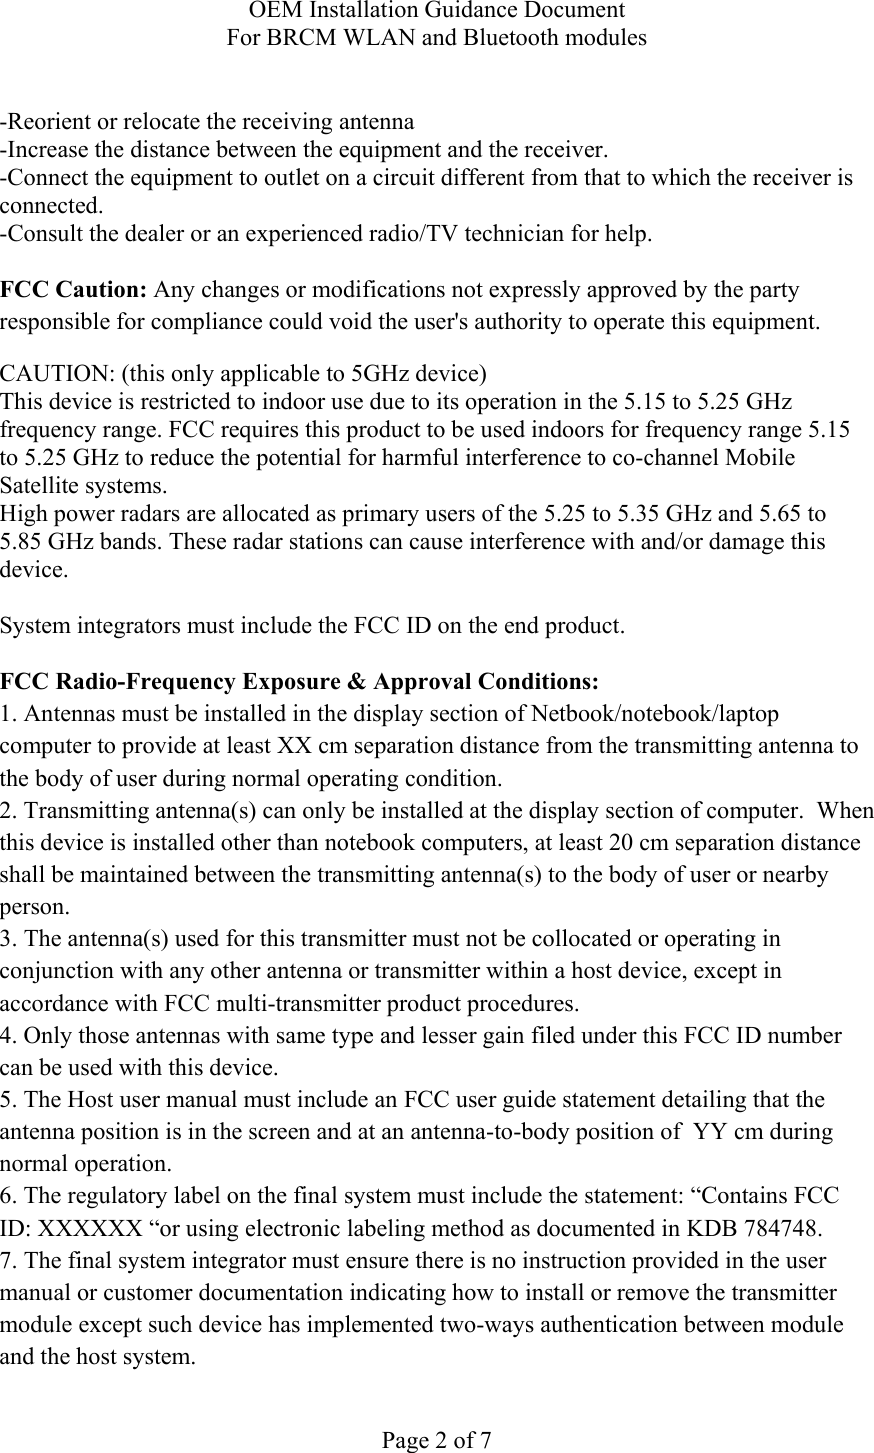 OEM Installation Guidance Document For BRCM WLAN and Bluetooth modules  Page 2 of 7  -Reorient or relocate the receiving antenna -Increase the distance between the equipment and the receiver. -Connect the equipment to outlet on a circuit different from that to which the receiver is connected. -Consult the dealer or an experienced radio/TV technician for help.  FCC Caution: Any changes or modifications not expressly approved by the party responsible for compliance could void the user&apos;s authority to operate this equipment. CAUTION: (this only applicable to 5GHz device) This device is restricted to indoor use due to its operation in the 5.15 to 5.25 GHz frequency range. FCC requires this product to be used indoors for frequency range 5.15 to 5.25 GHz to reduce the potential for harmful interference to co-channel Mobile Satellite systems. High power radars are allocated as primary users of the 5.25 to 5.35 GHz and 5.65 to 5.85 GHz bands. These radar stations can cause interference with and/or damage this device.  System integrators must include the FCC ID on the end product.   FCC Radio-Frequency Exposure &amp; Approval Conditions: 1. Antennas must be installed in the display section of Netbook/notebook/laptop computer to provide at least XX cm separation distance from the transmitting antenna to the body of user during normal operating condition. 2. Transmitting antenna(s) can only be installed at the display section of computer.  When this device is installed other than notebook computers, at least 20 cm separation distance shall be maintained between the transmitting antenna(s) to the body of user or nearby person. 3. The antenna(s) used for this transmitter must not be collocated or operating in conjunction with any other antenna or transmitter within a host device, except in accordance with FCC multi-transmitter product procedures. 4. Only those antennas with same type and lesser gain filed under this FCC ID number can be used with this device. 5. The Host user manual must include an FCC user guide statement detailing that the antenna position is in the screen and at an antenna-to-body position of  YY cm during normal operation. 6. The regulatory label on the final system must include the statement: “Contains FCC ID: XXXXXX “or using electronic labeling method as documented in KDB 784748. 7. The final system integrator must ensure there is no instruction provided in the user manual or customer documentation indicating how to install or remove the transmitter module except such device has implemented two-ways authentication between module and the host system. 